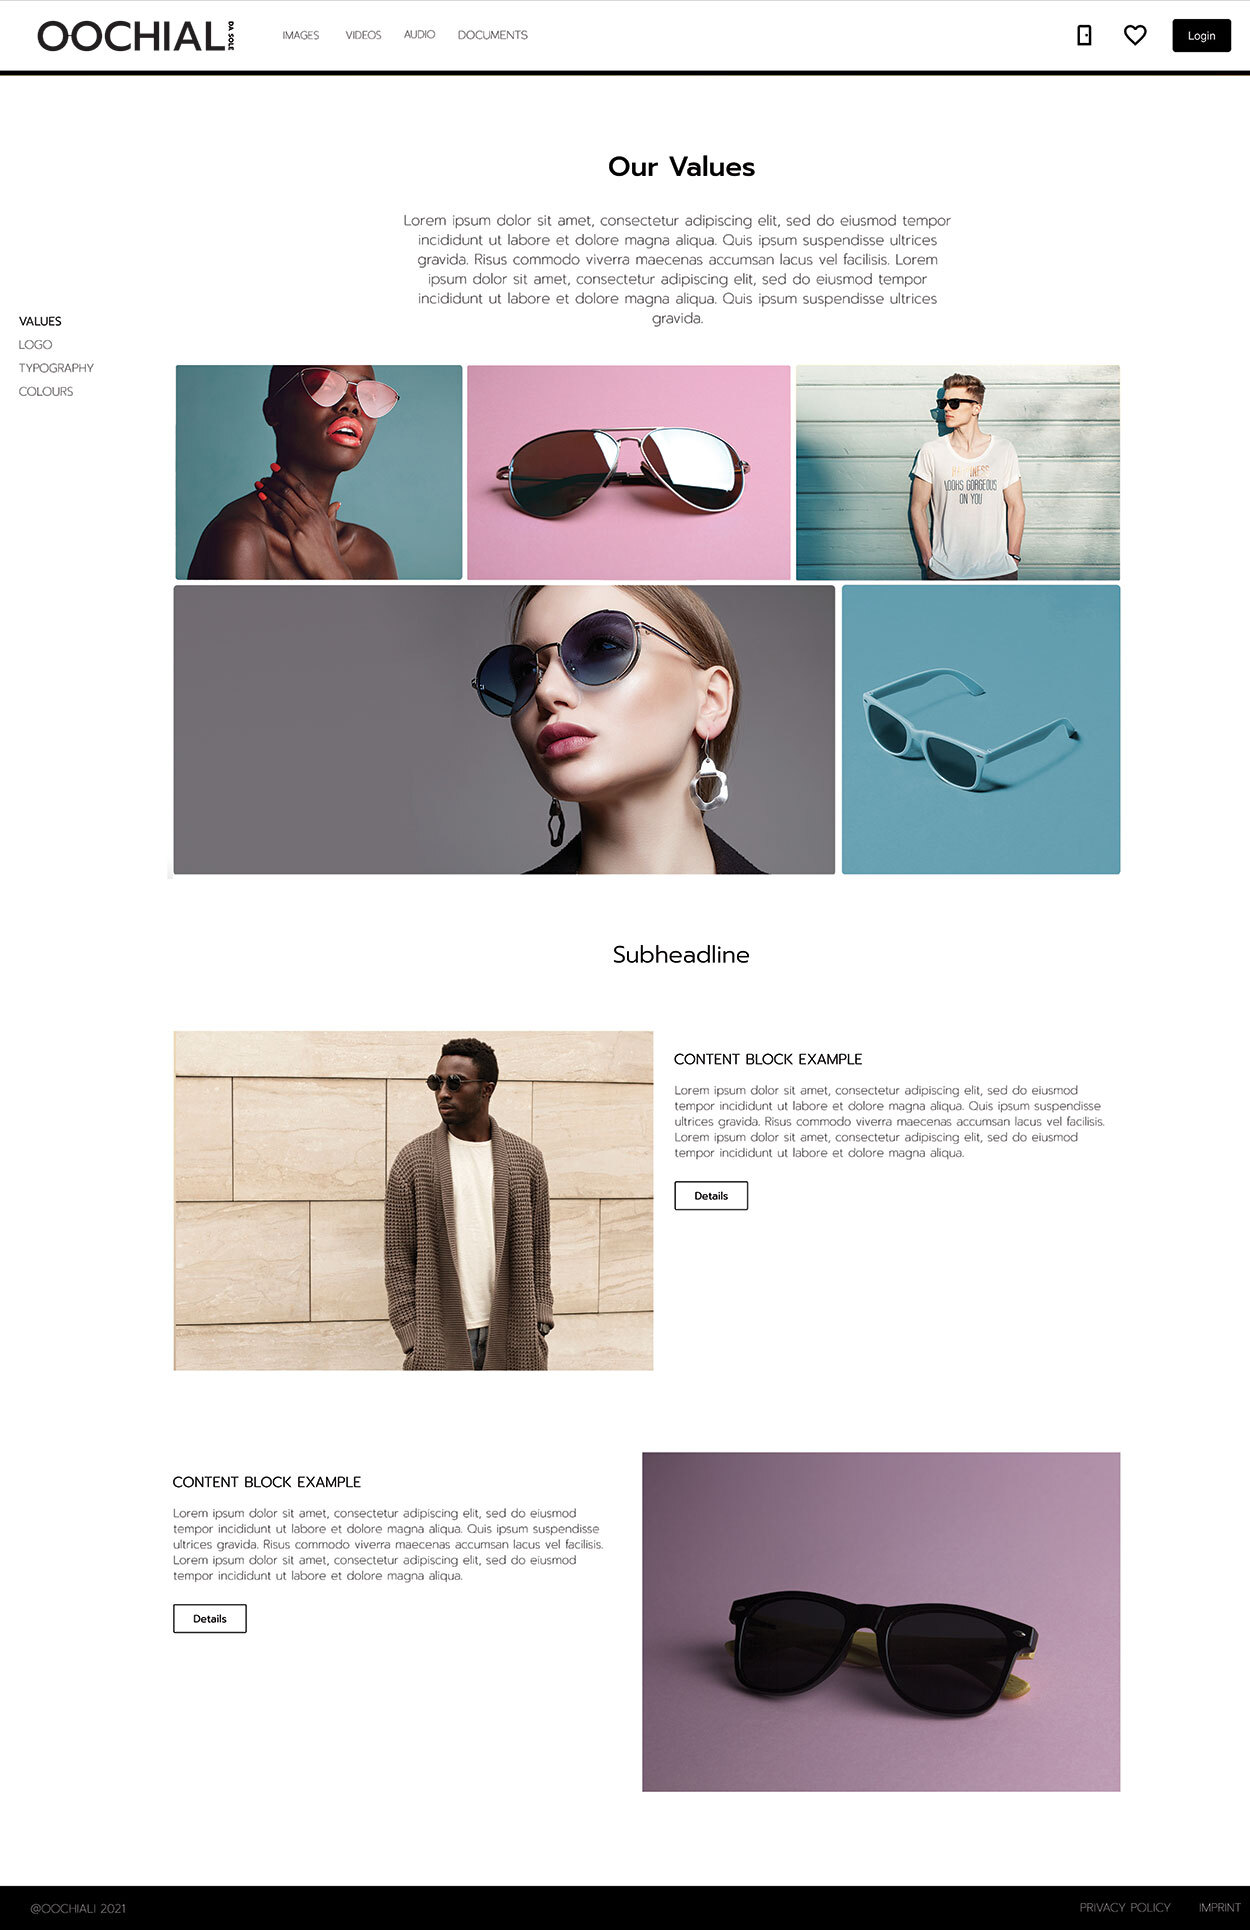 Brand Portal Feature Luxury and Fashion Values and Navigation